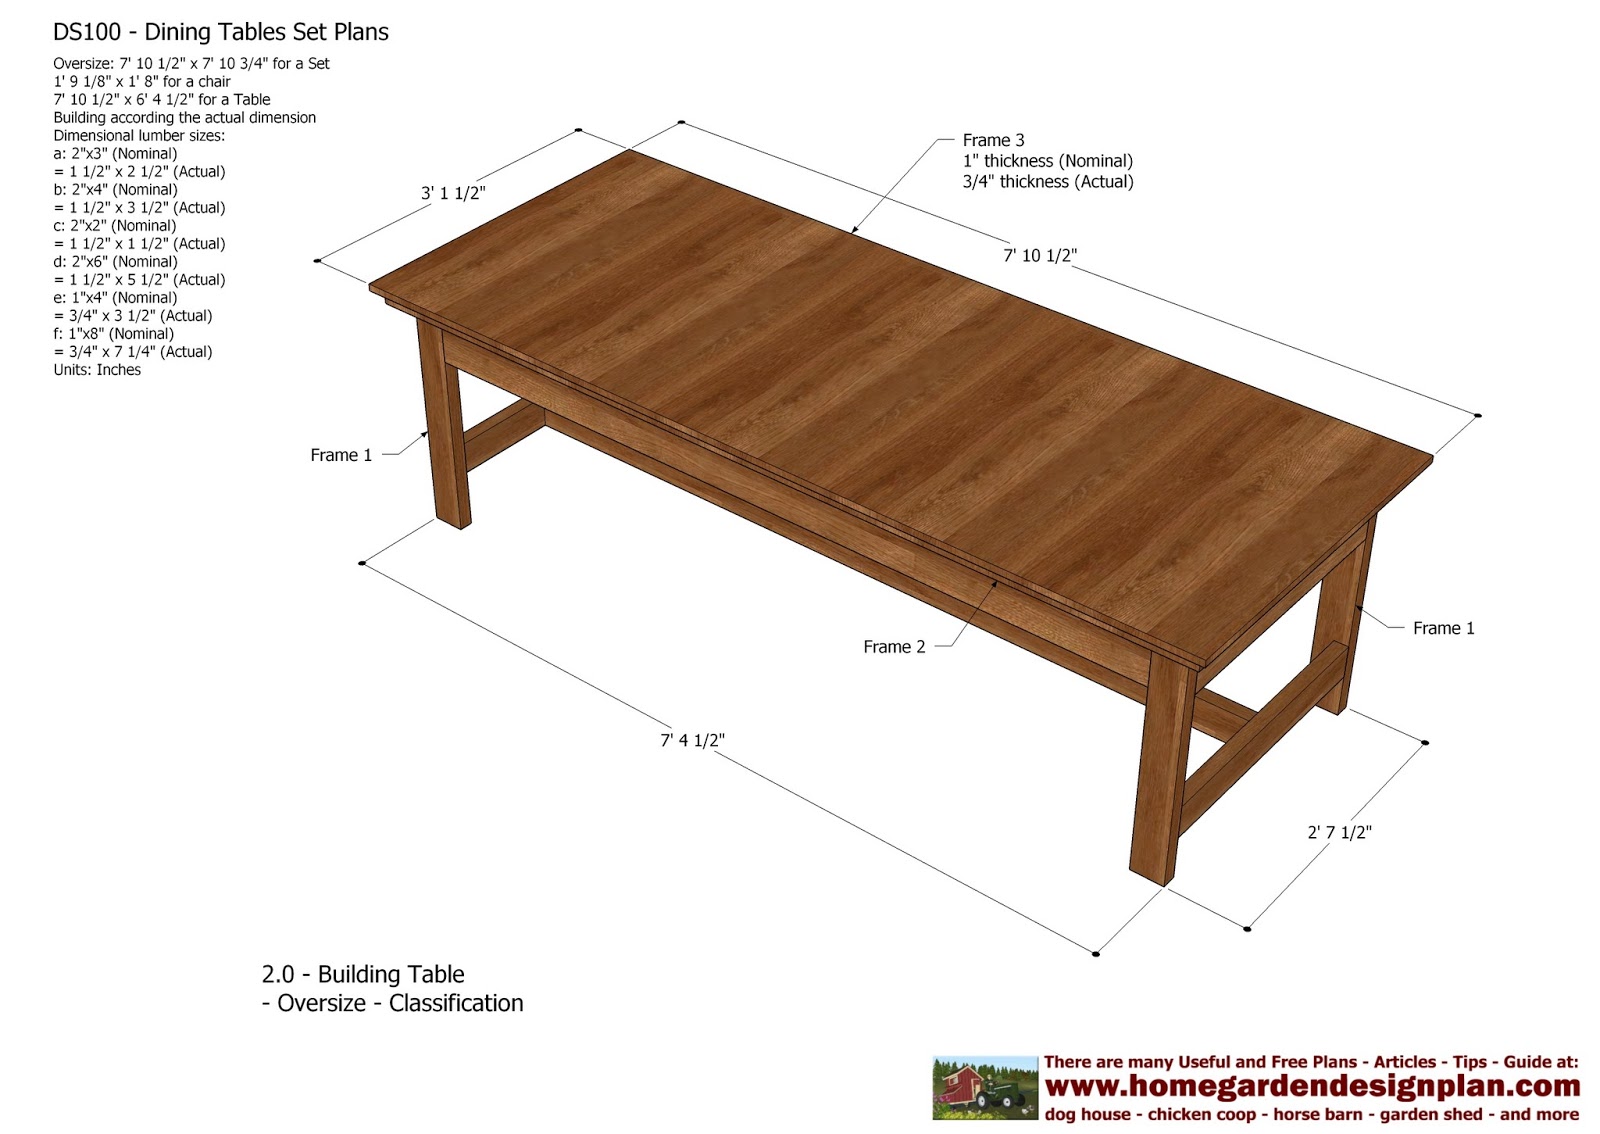 DS100 - Dining Table Set Plans - Woodworking Plans - Outdoor Furniture ...